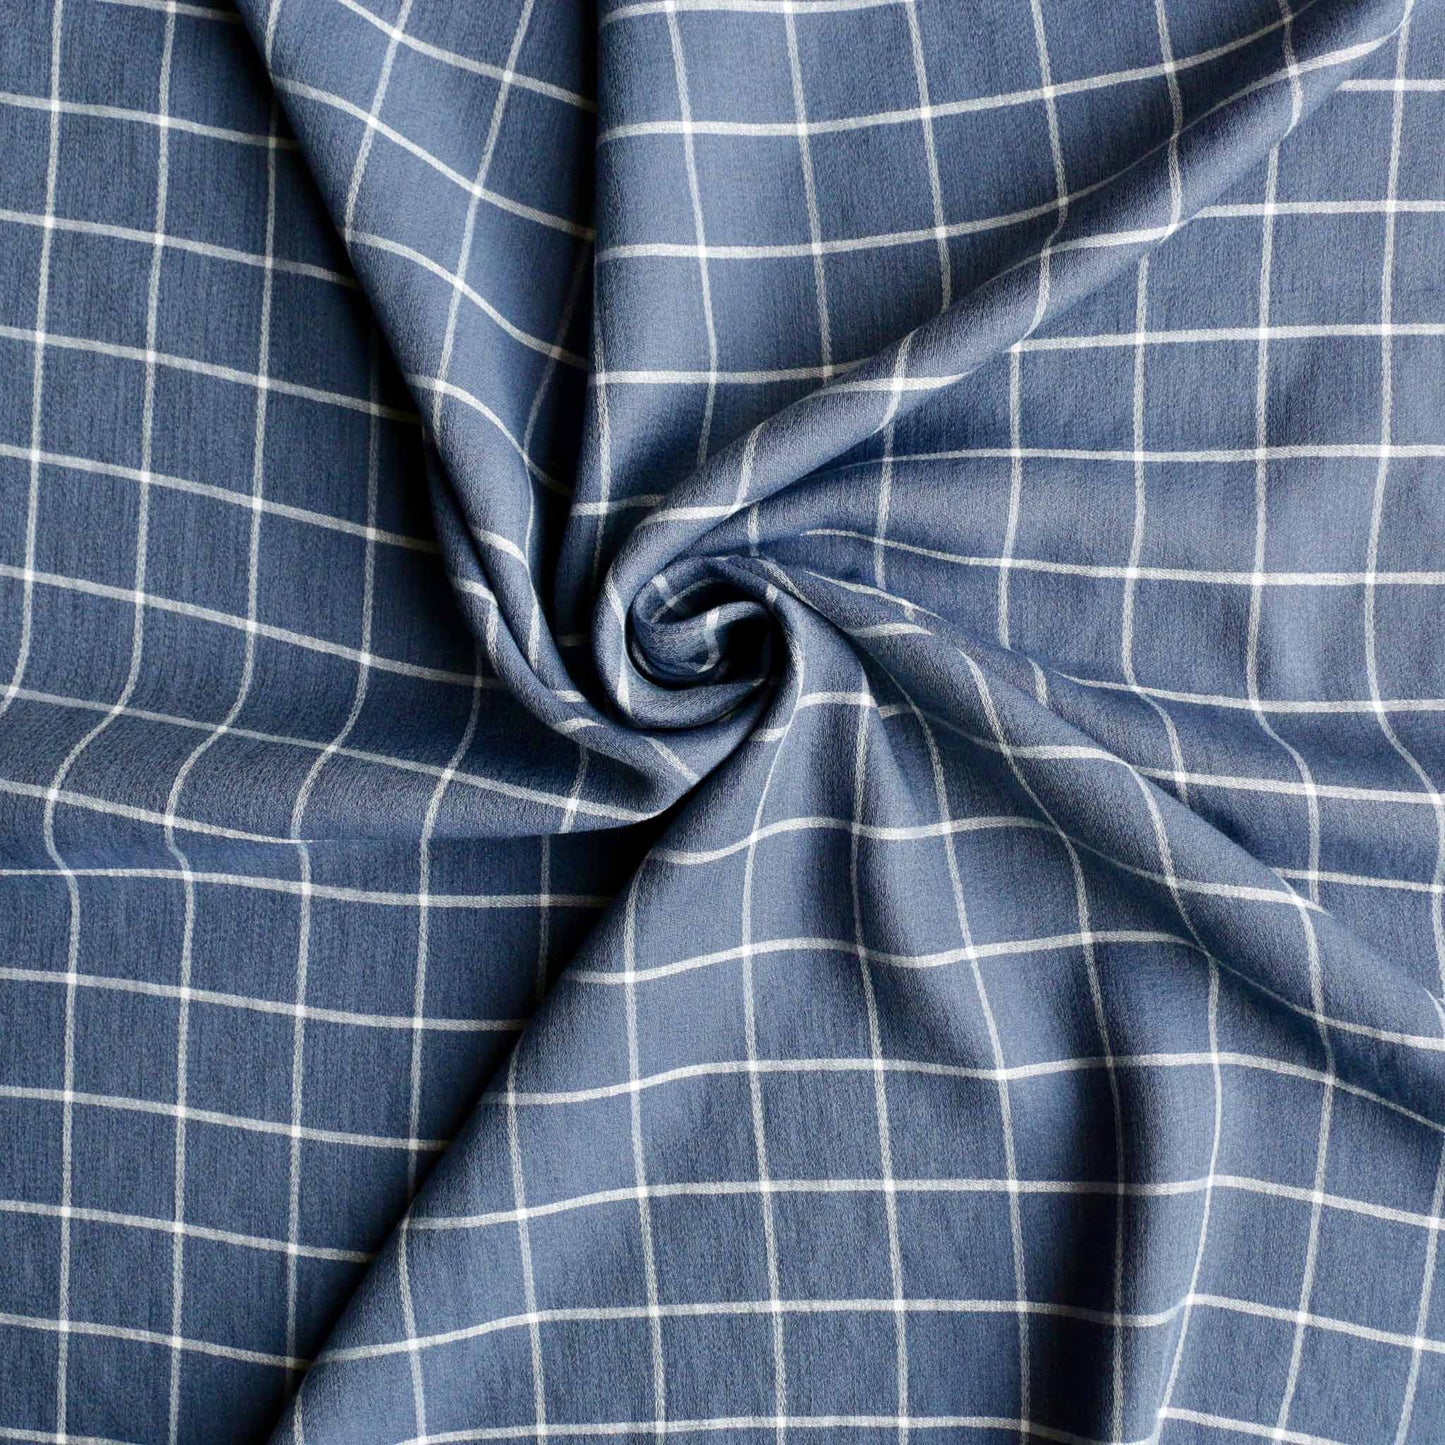 white and blue check pattern viscose rayon voile dressmaking fabric